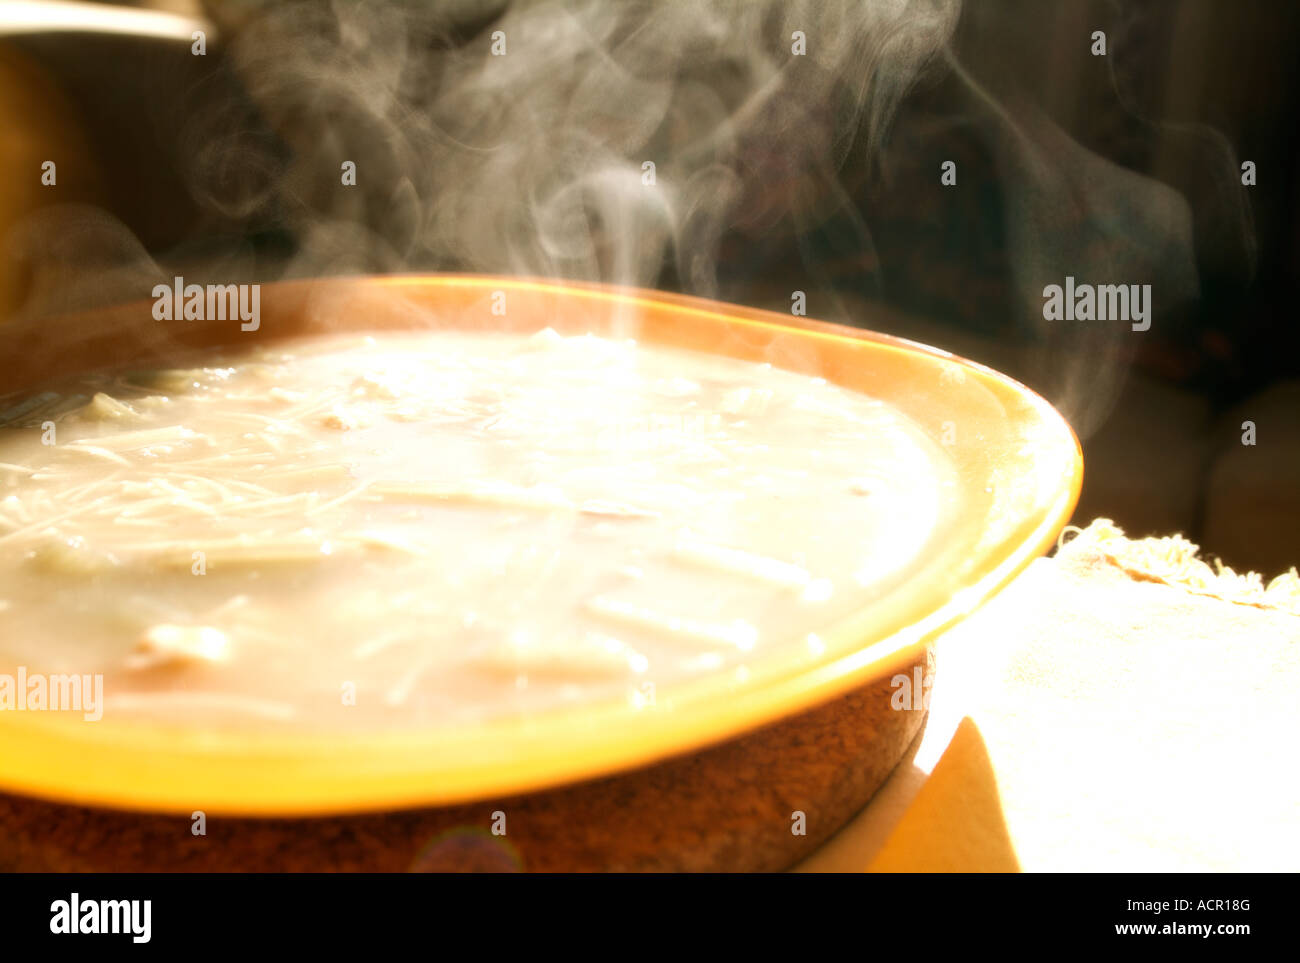 Vermicelli soup dish steaming. Stock Photo